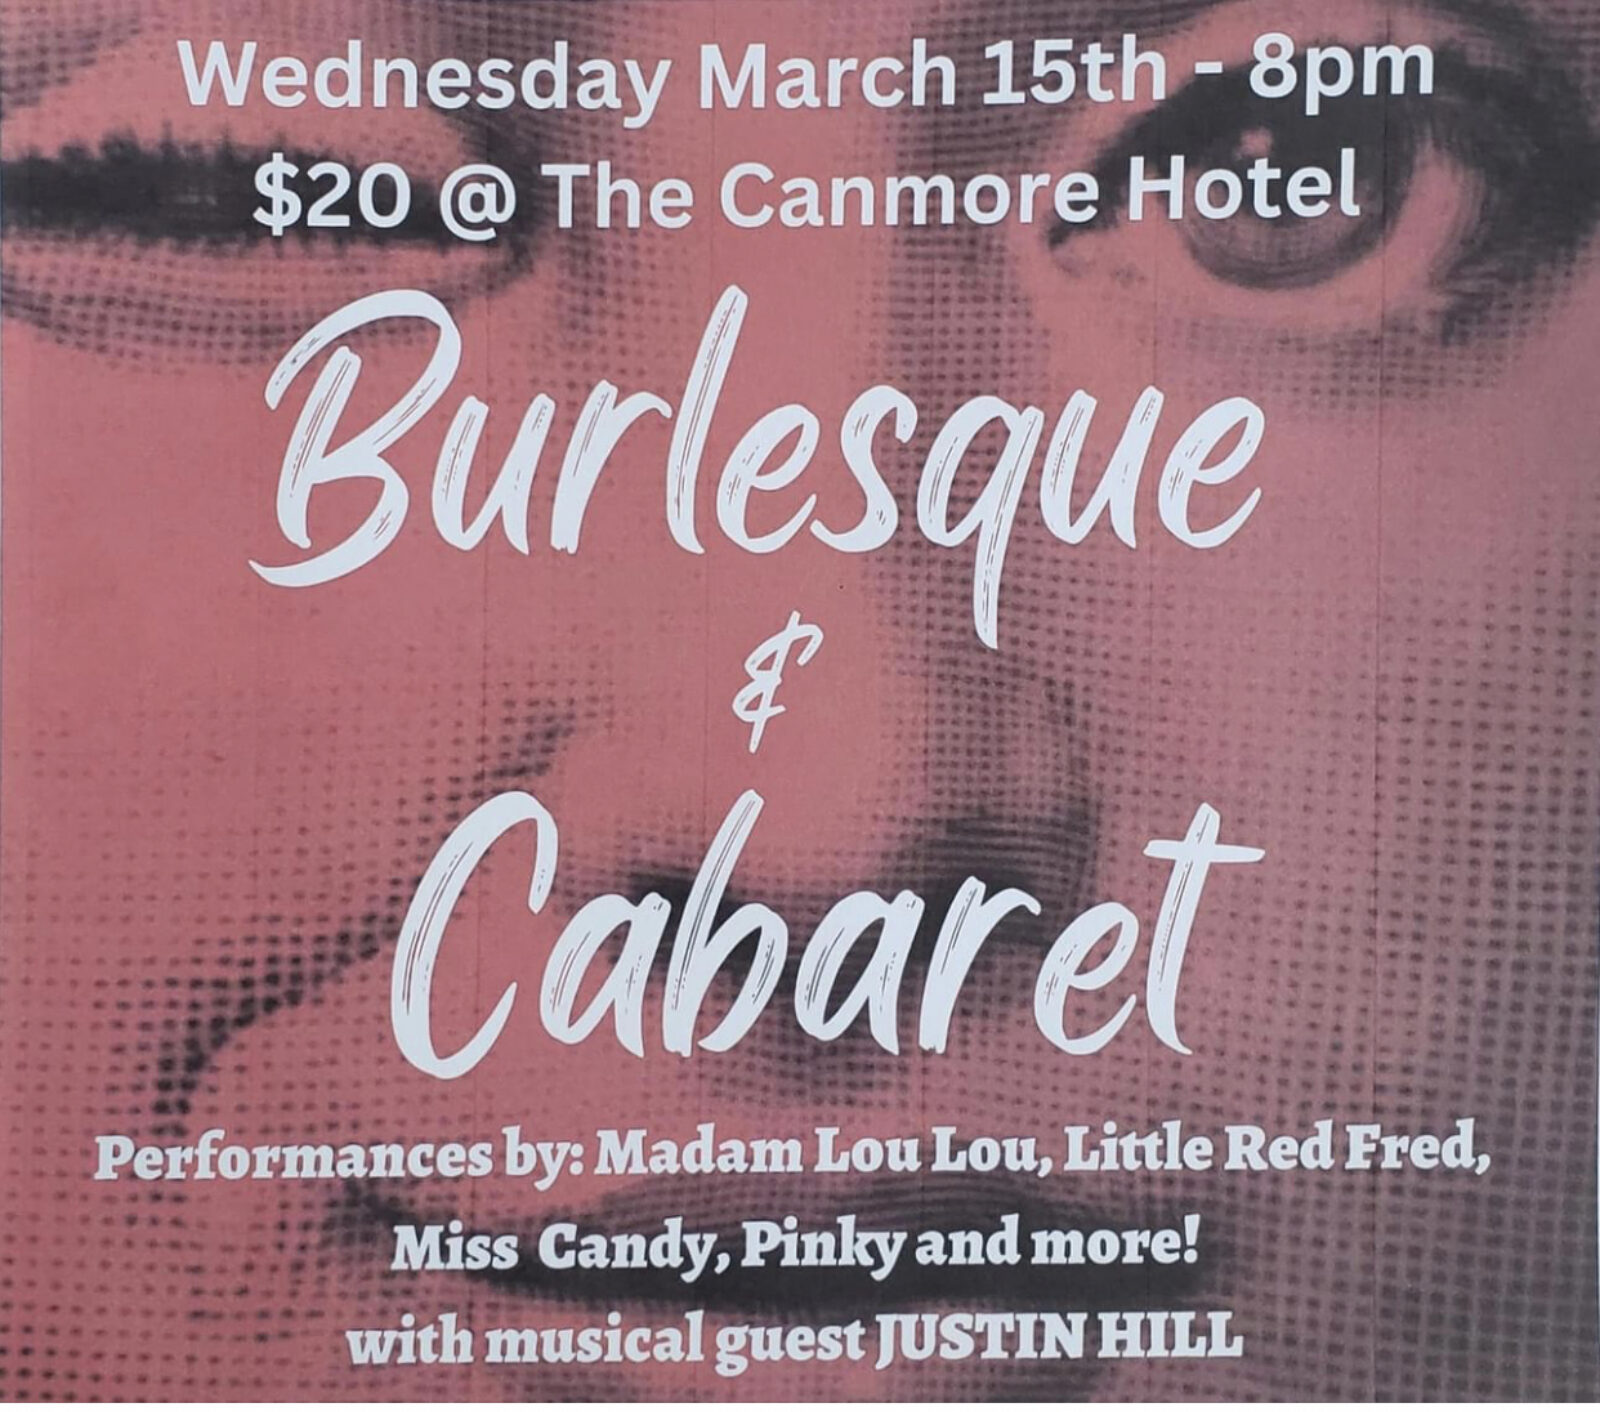 Cabaret at canmore hotel